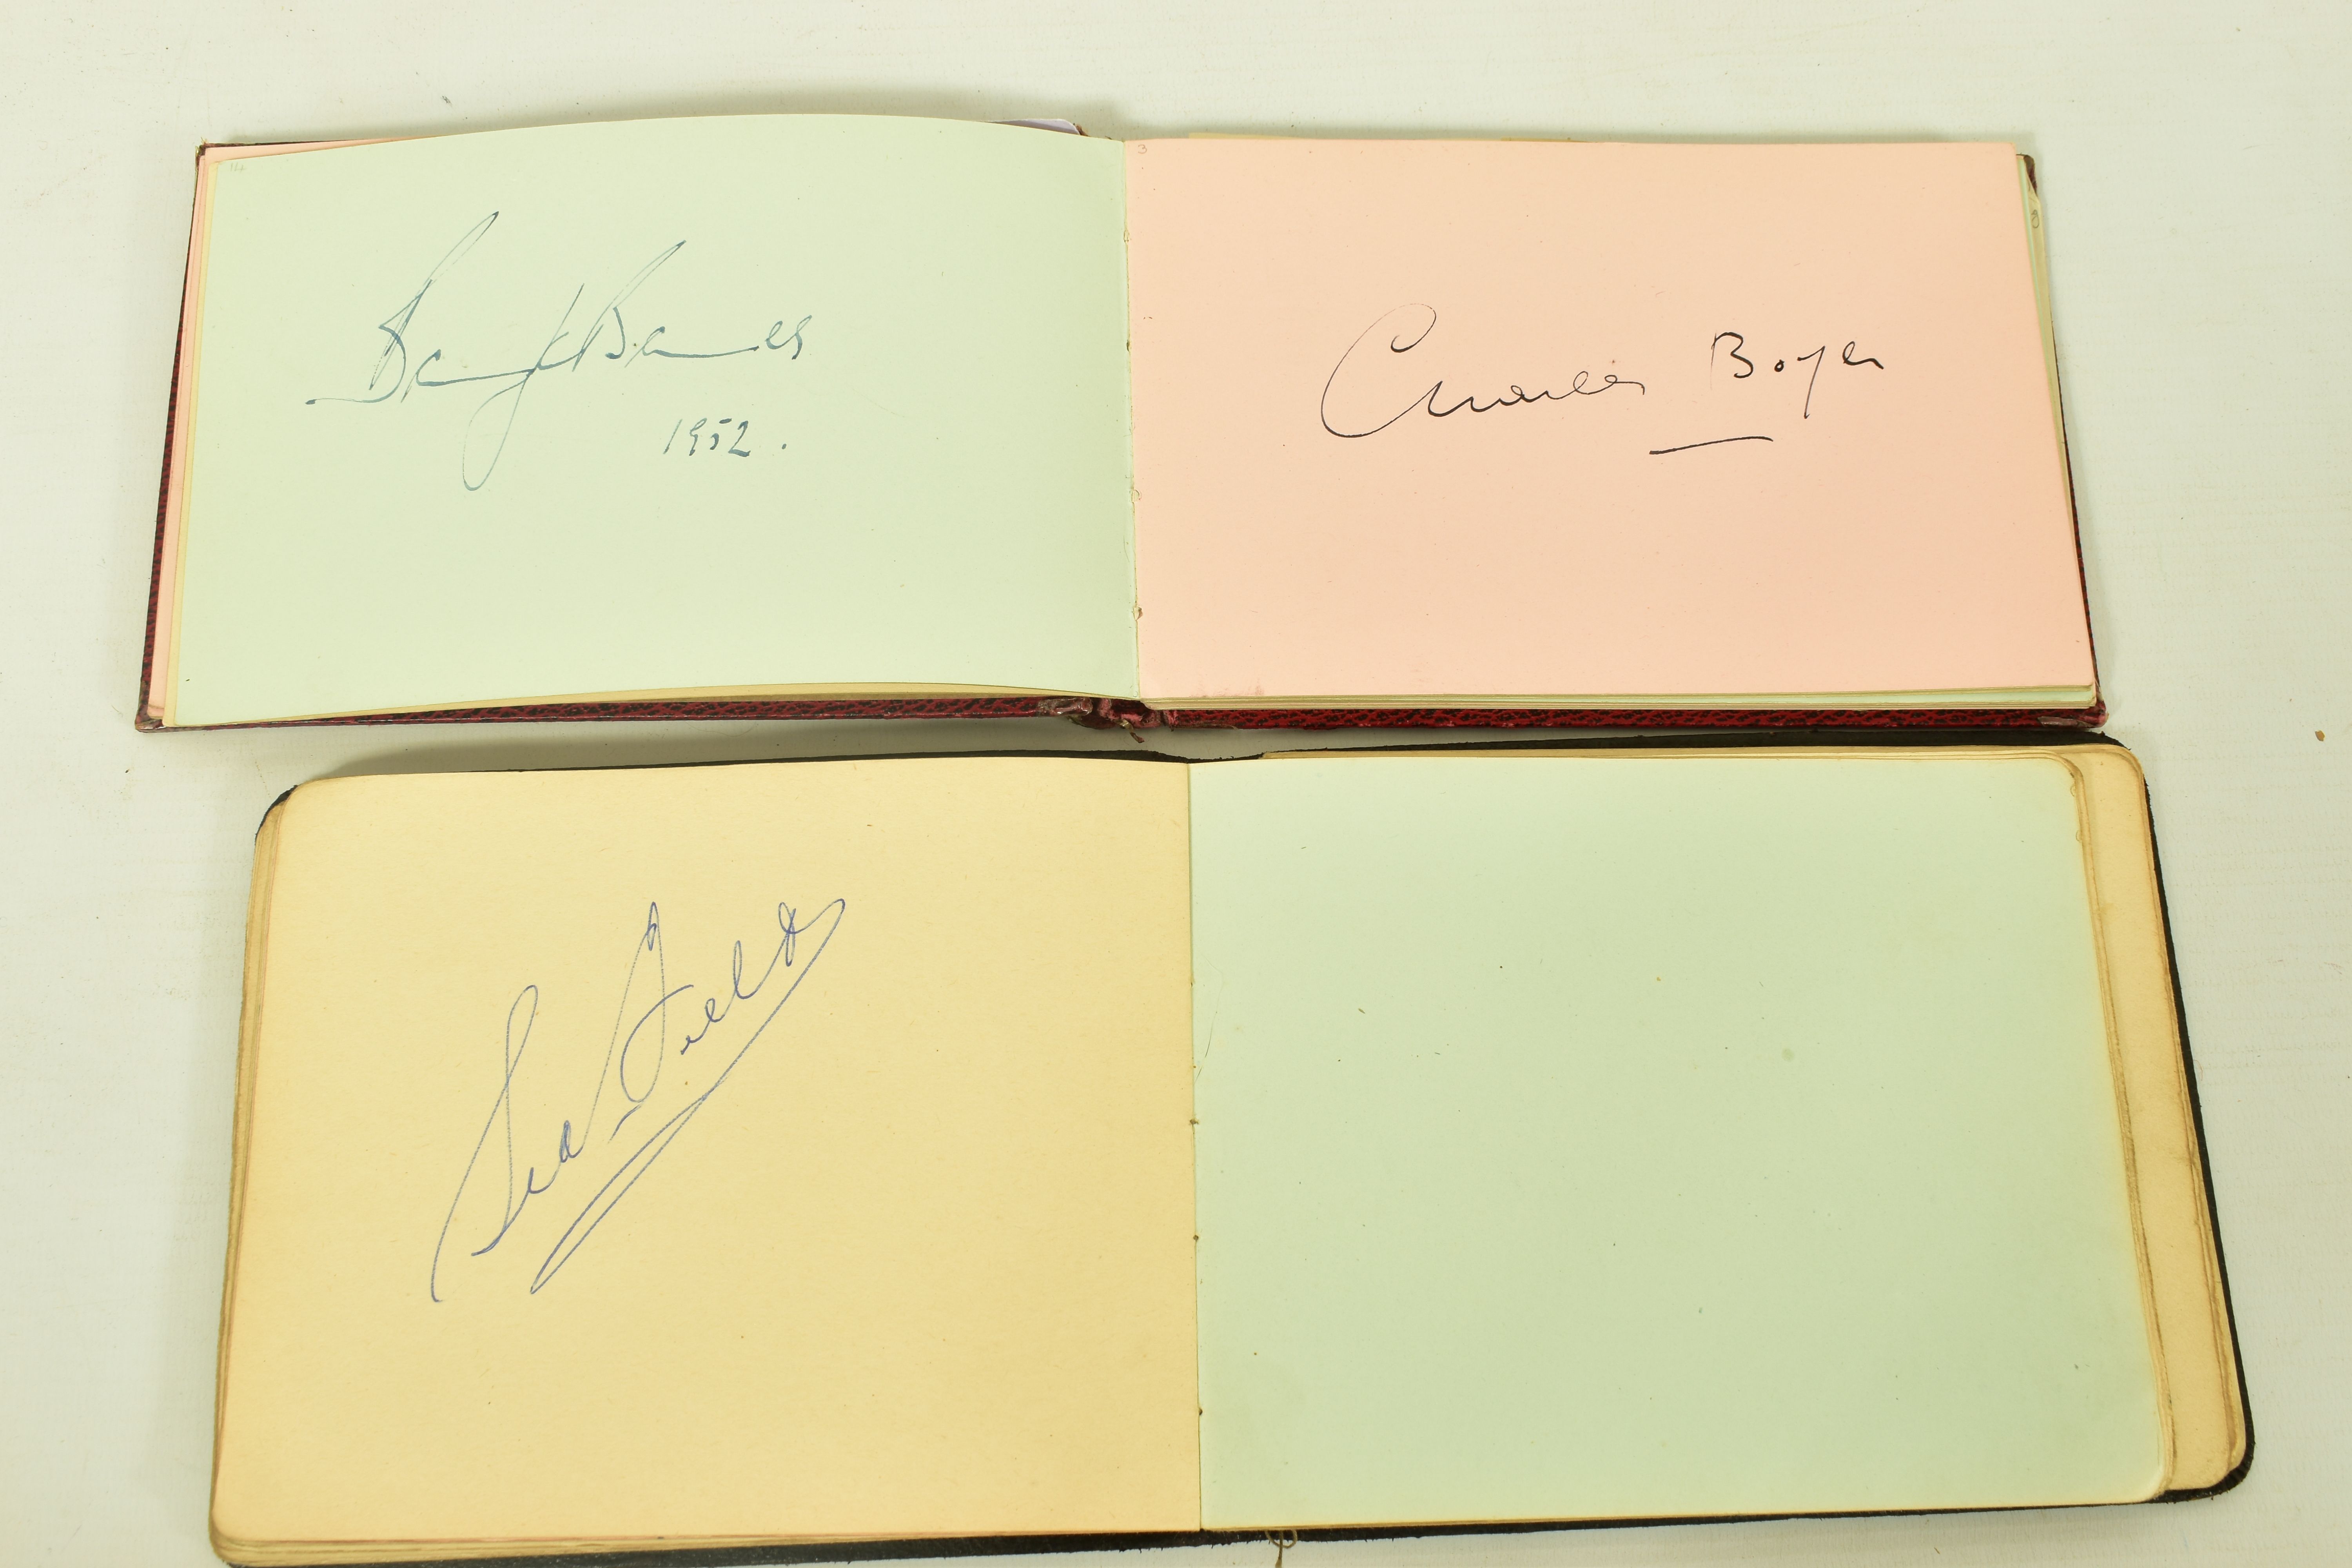 FILM & STAGE AUTOGRAPH ALBUM, a collection of signatures in two autograph albums featuring some of - Image 10 of 11